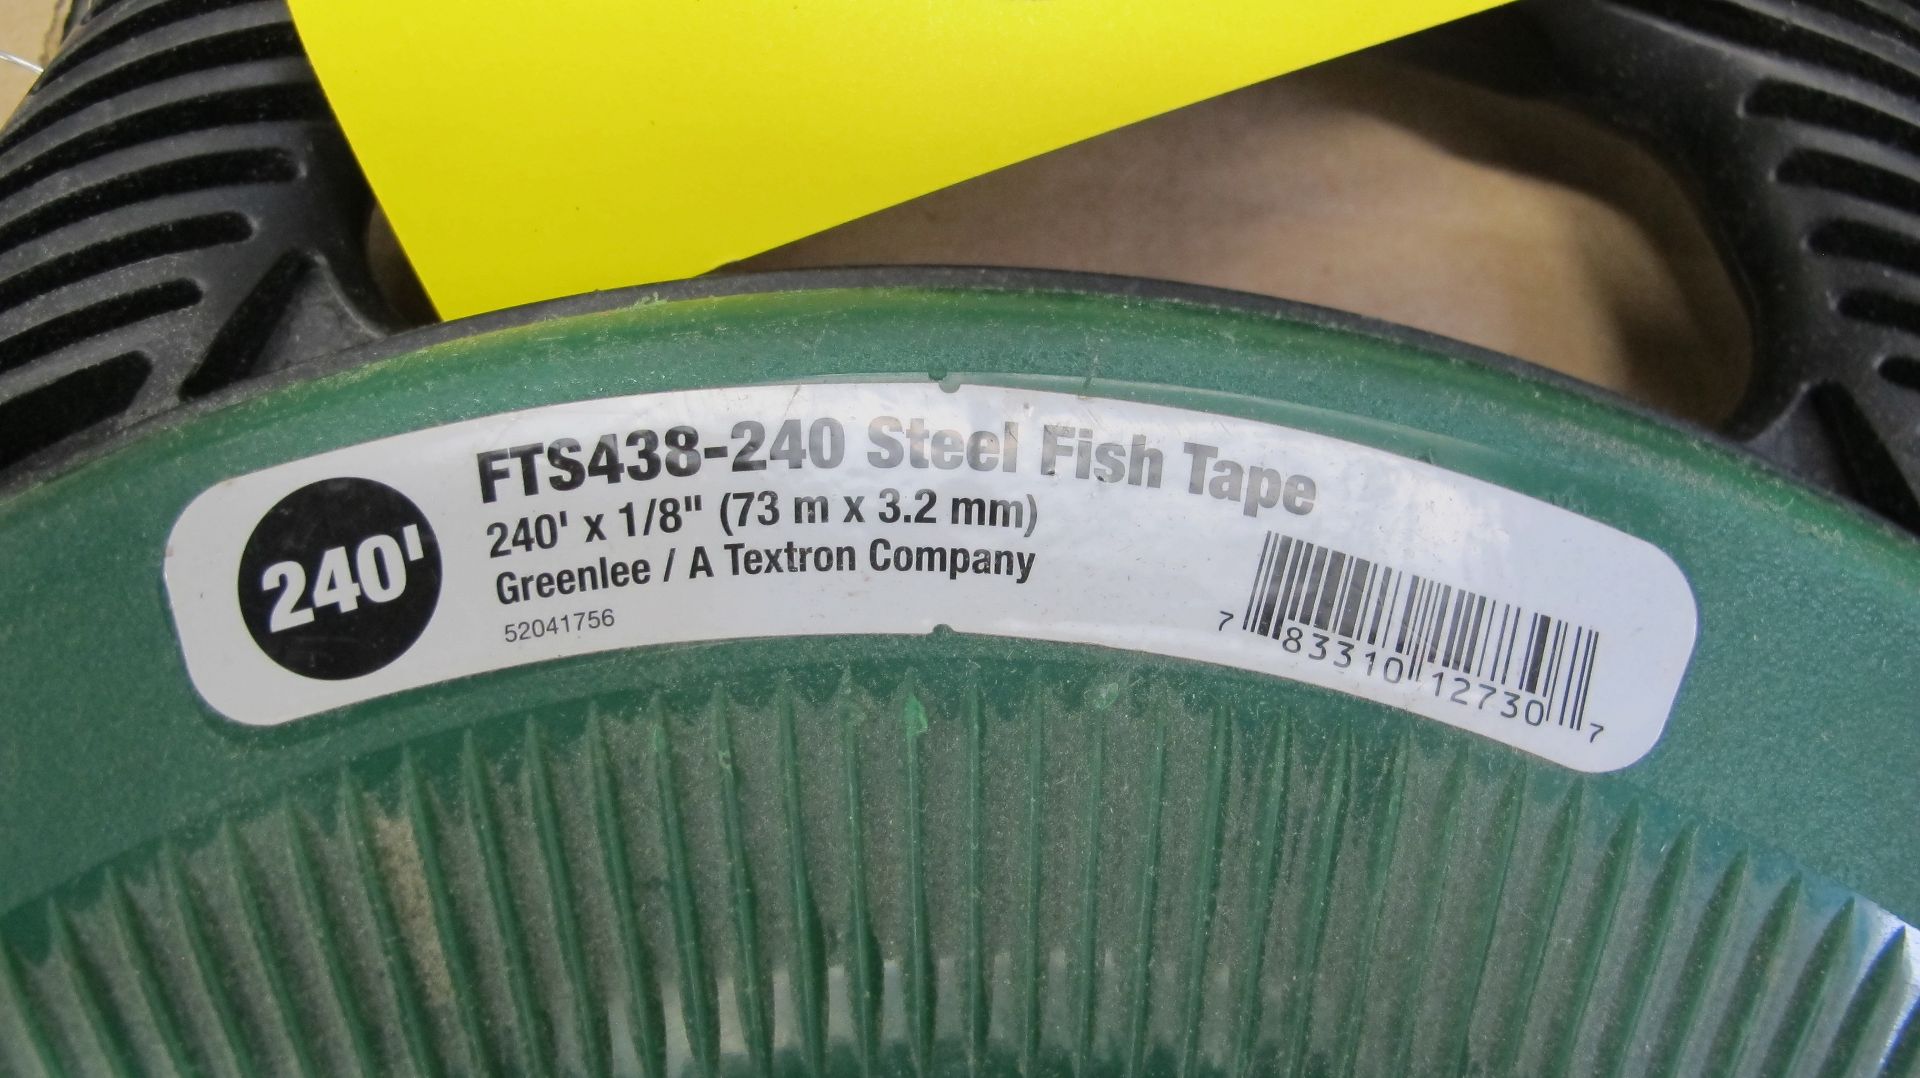 LOT OF GREENLEE 436-10 NYLON FISH TAPE 100' X 3/16" DIA., GREENLEE FTS438-246 STEEL FISH TAPE 240' X - Image 3 of 4